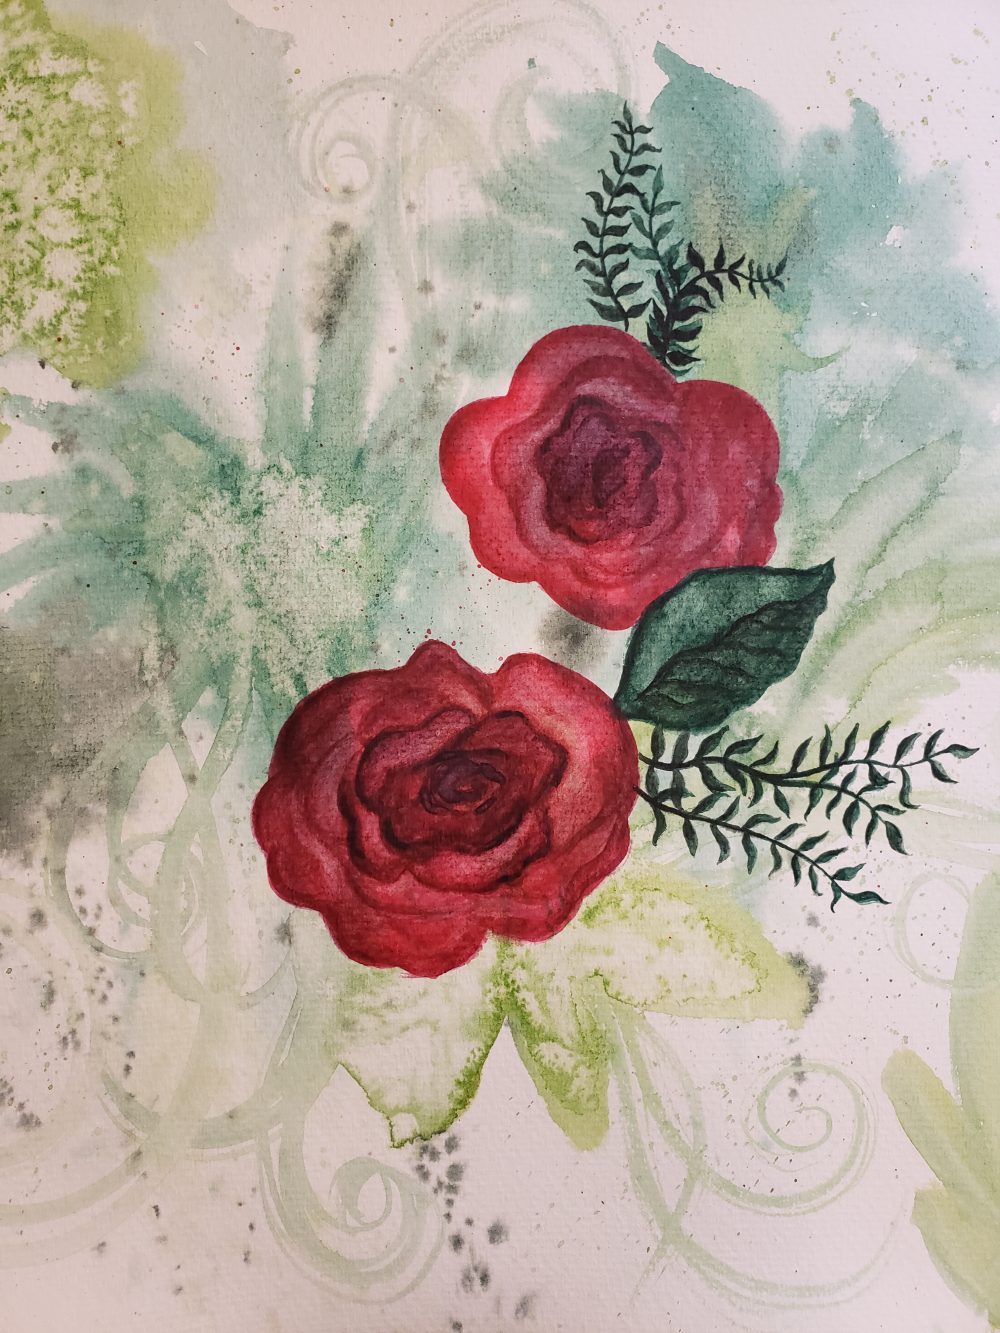 A drawing of red roses.